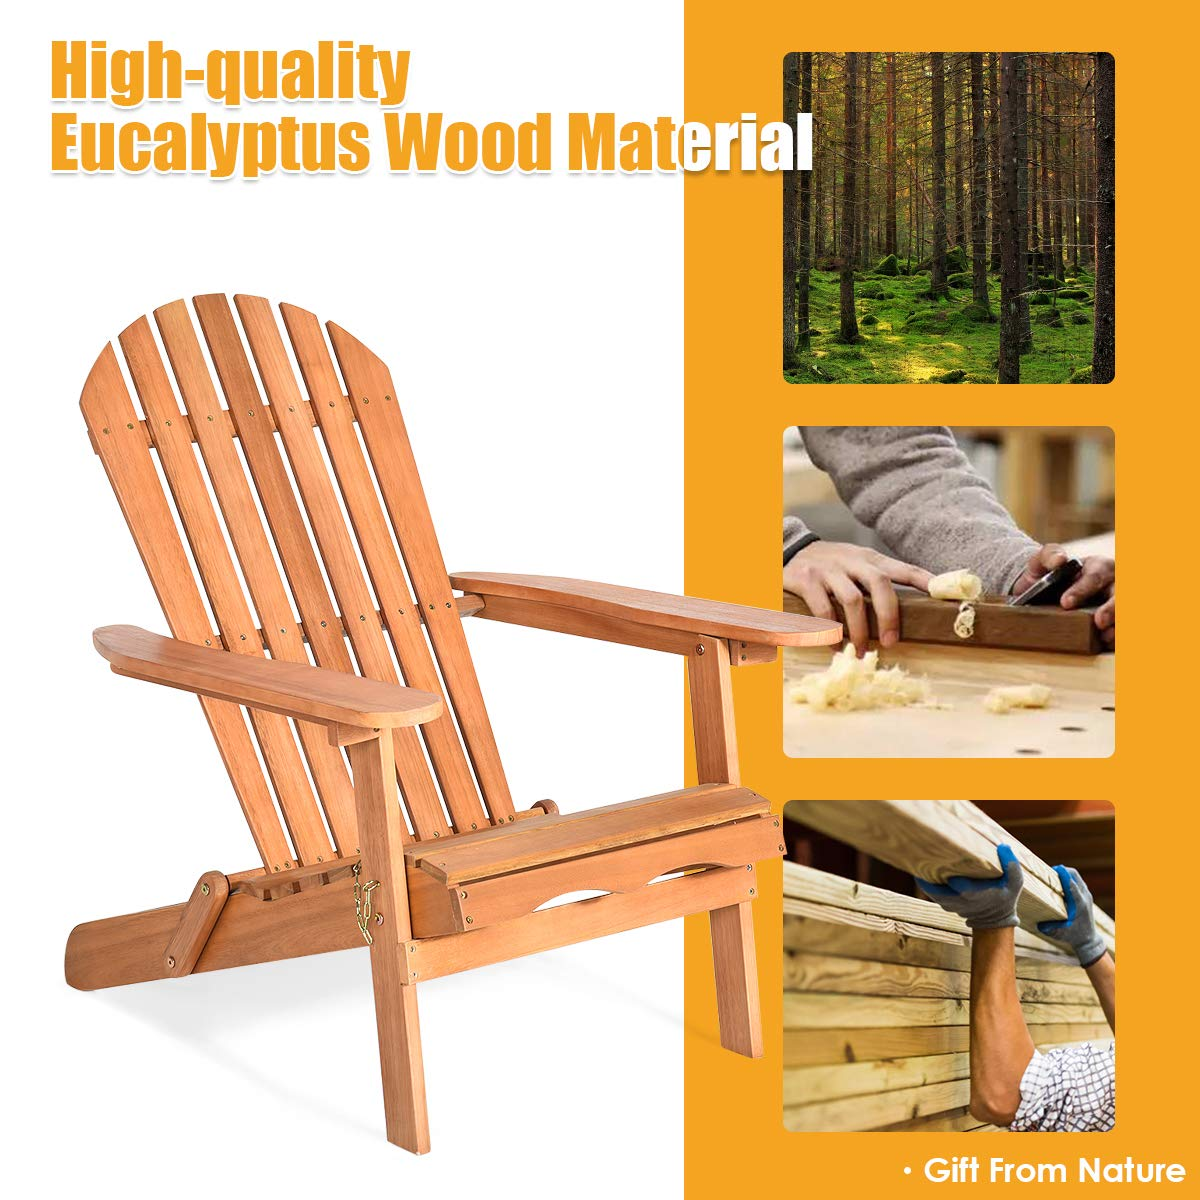 Giantex Adirondack Chair Wooden and Foldable Outdoor Lounger Chair 34"X28"X35.5"